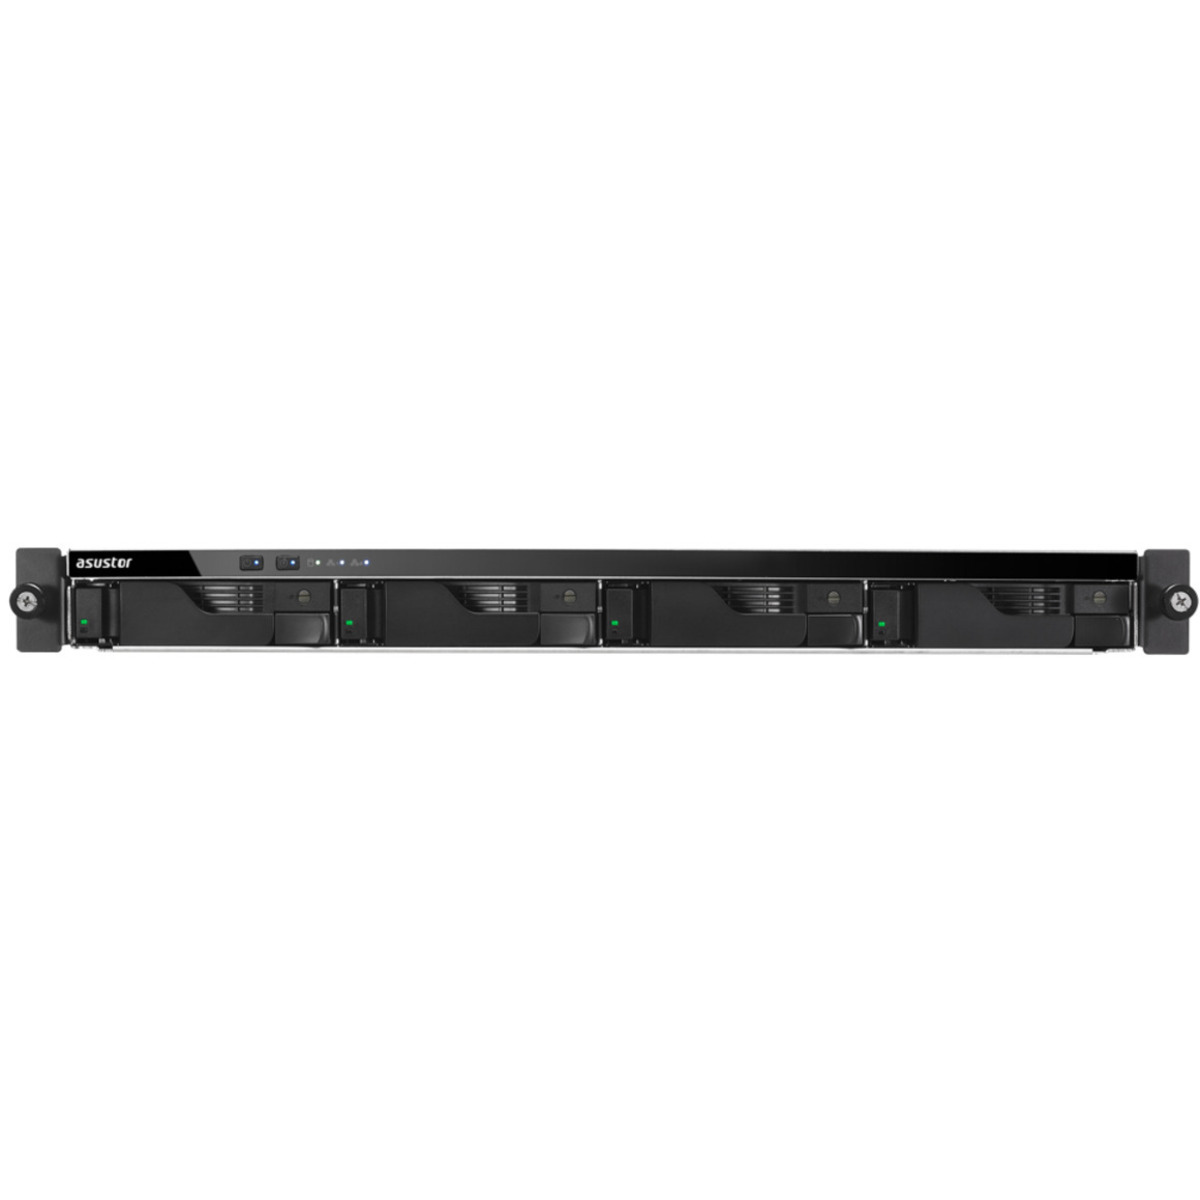 buy ASUSTOR LOCKERSTOR 4RS AS6504RS 88tb RackMount NAS - Network Attached Storage Device 4x22000gb Seagate IronWolf Pro ST22000NT001 3.5 7200rpm SATA 6Gb/s HDD NAS Class Drives Installed - Burn-In Tested - FREE RAM UPGRADE - nas headquarters buy network attached storage server device das new raid-5 free shipping simply usa LOCKERSTOR 4RS AS6504RS